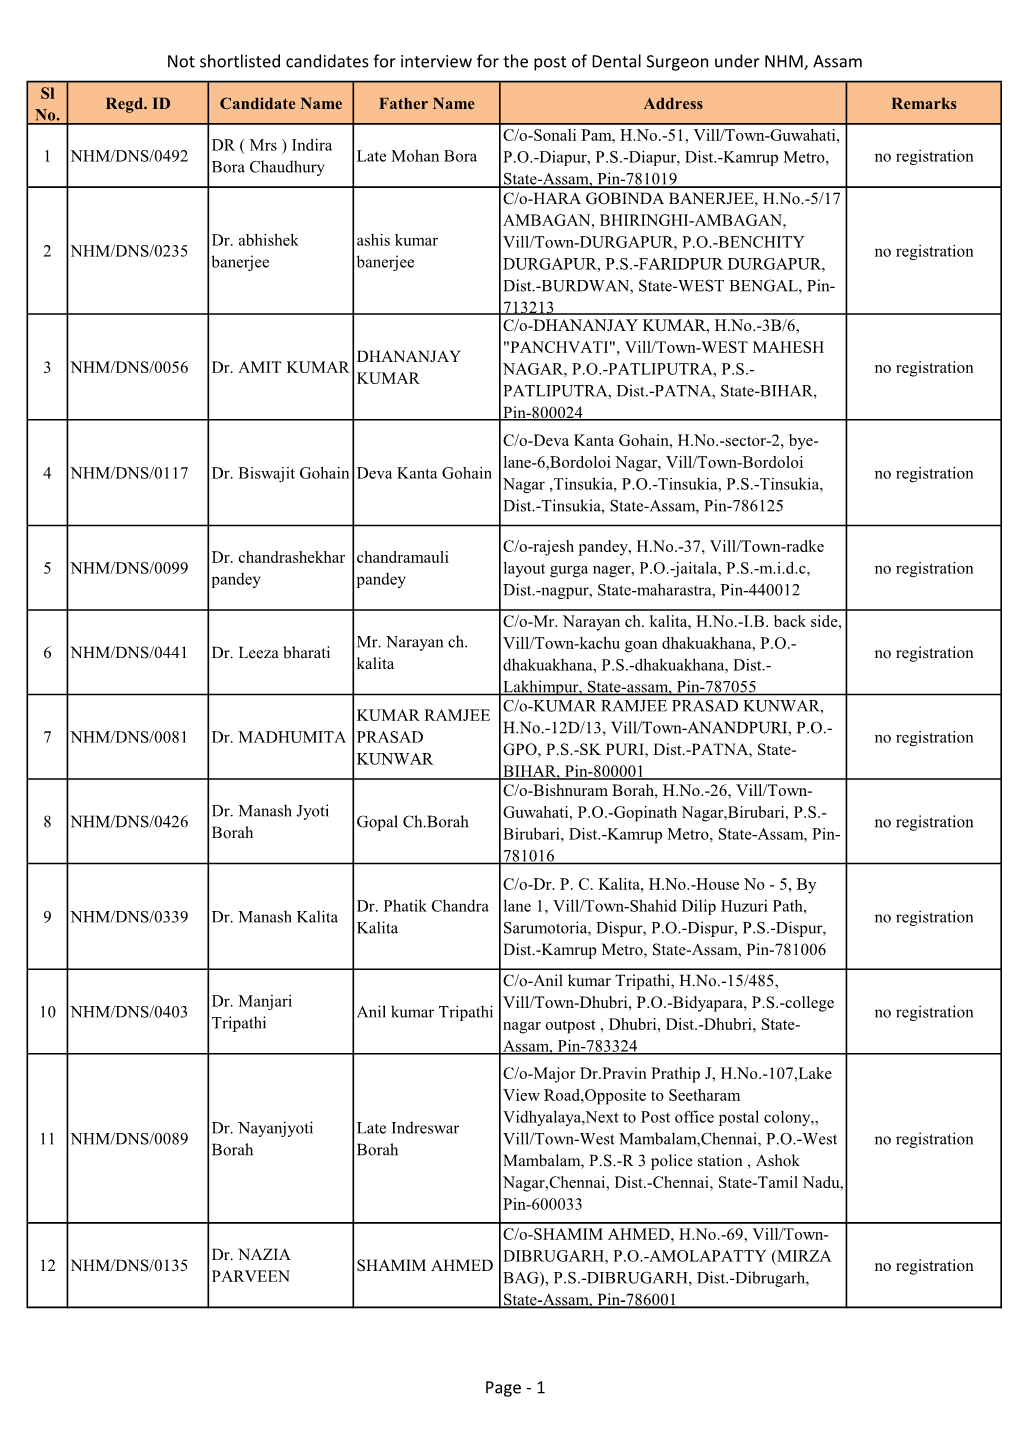 Not Shortlisted Candidates for Interview for the Post of Dental Surgeon Under NHM, Assam Sl Regd